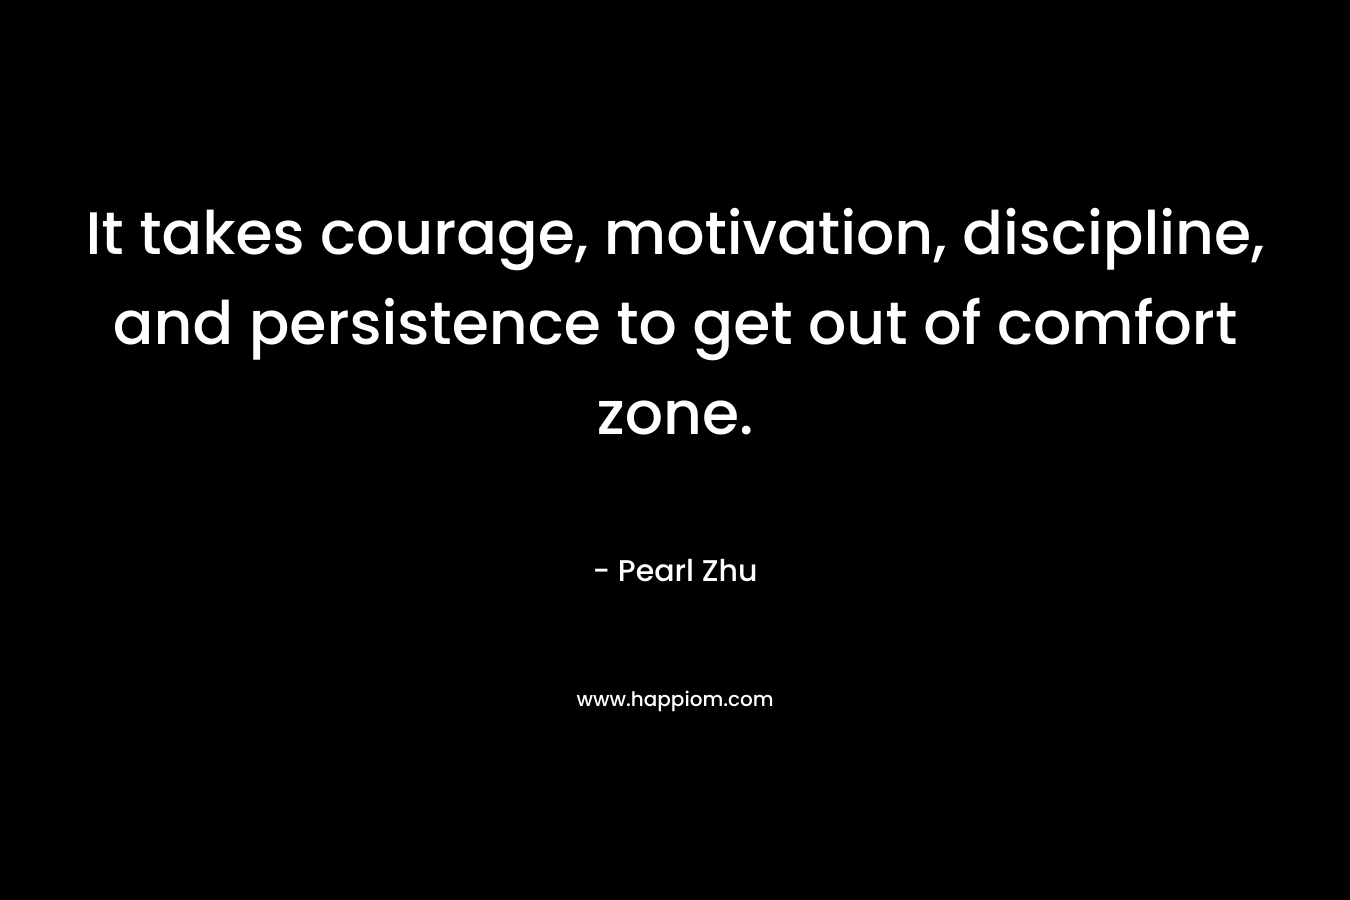 It takes courage, motivation, discipline, and persistence to get out of comfort zone.